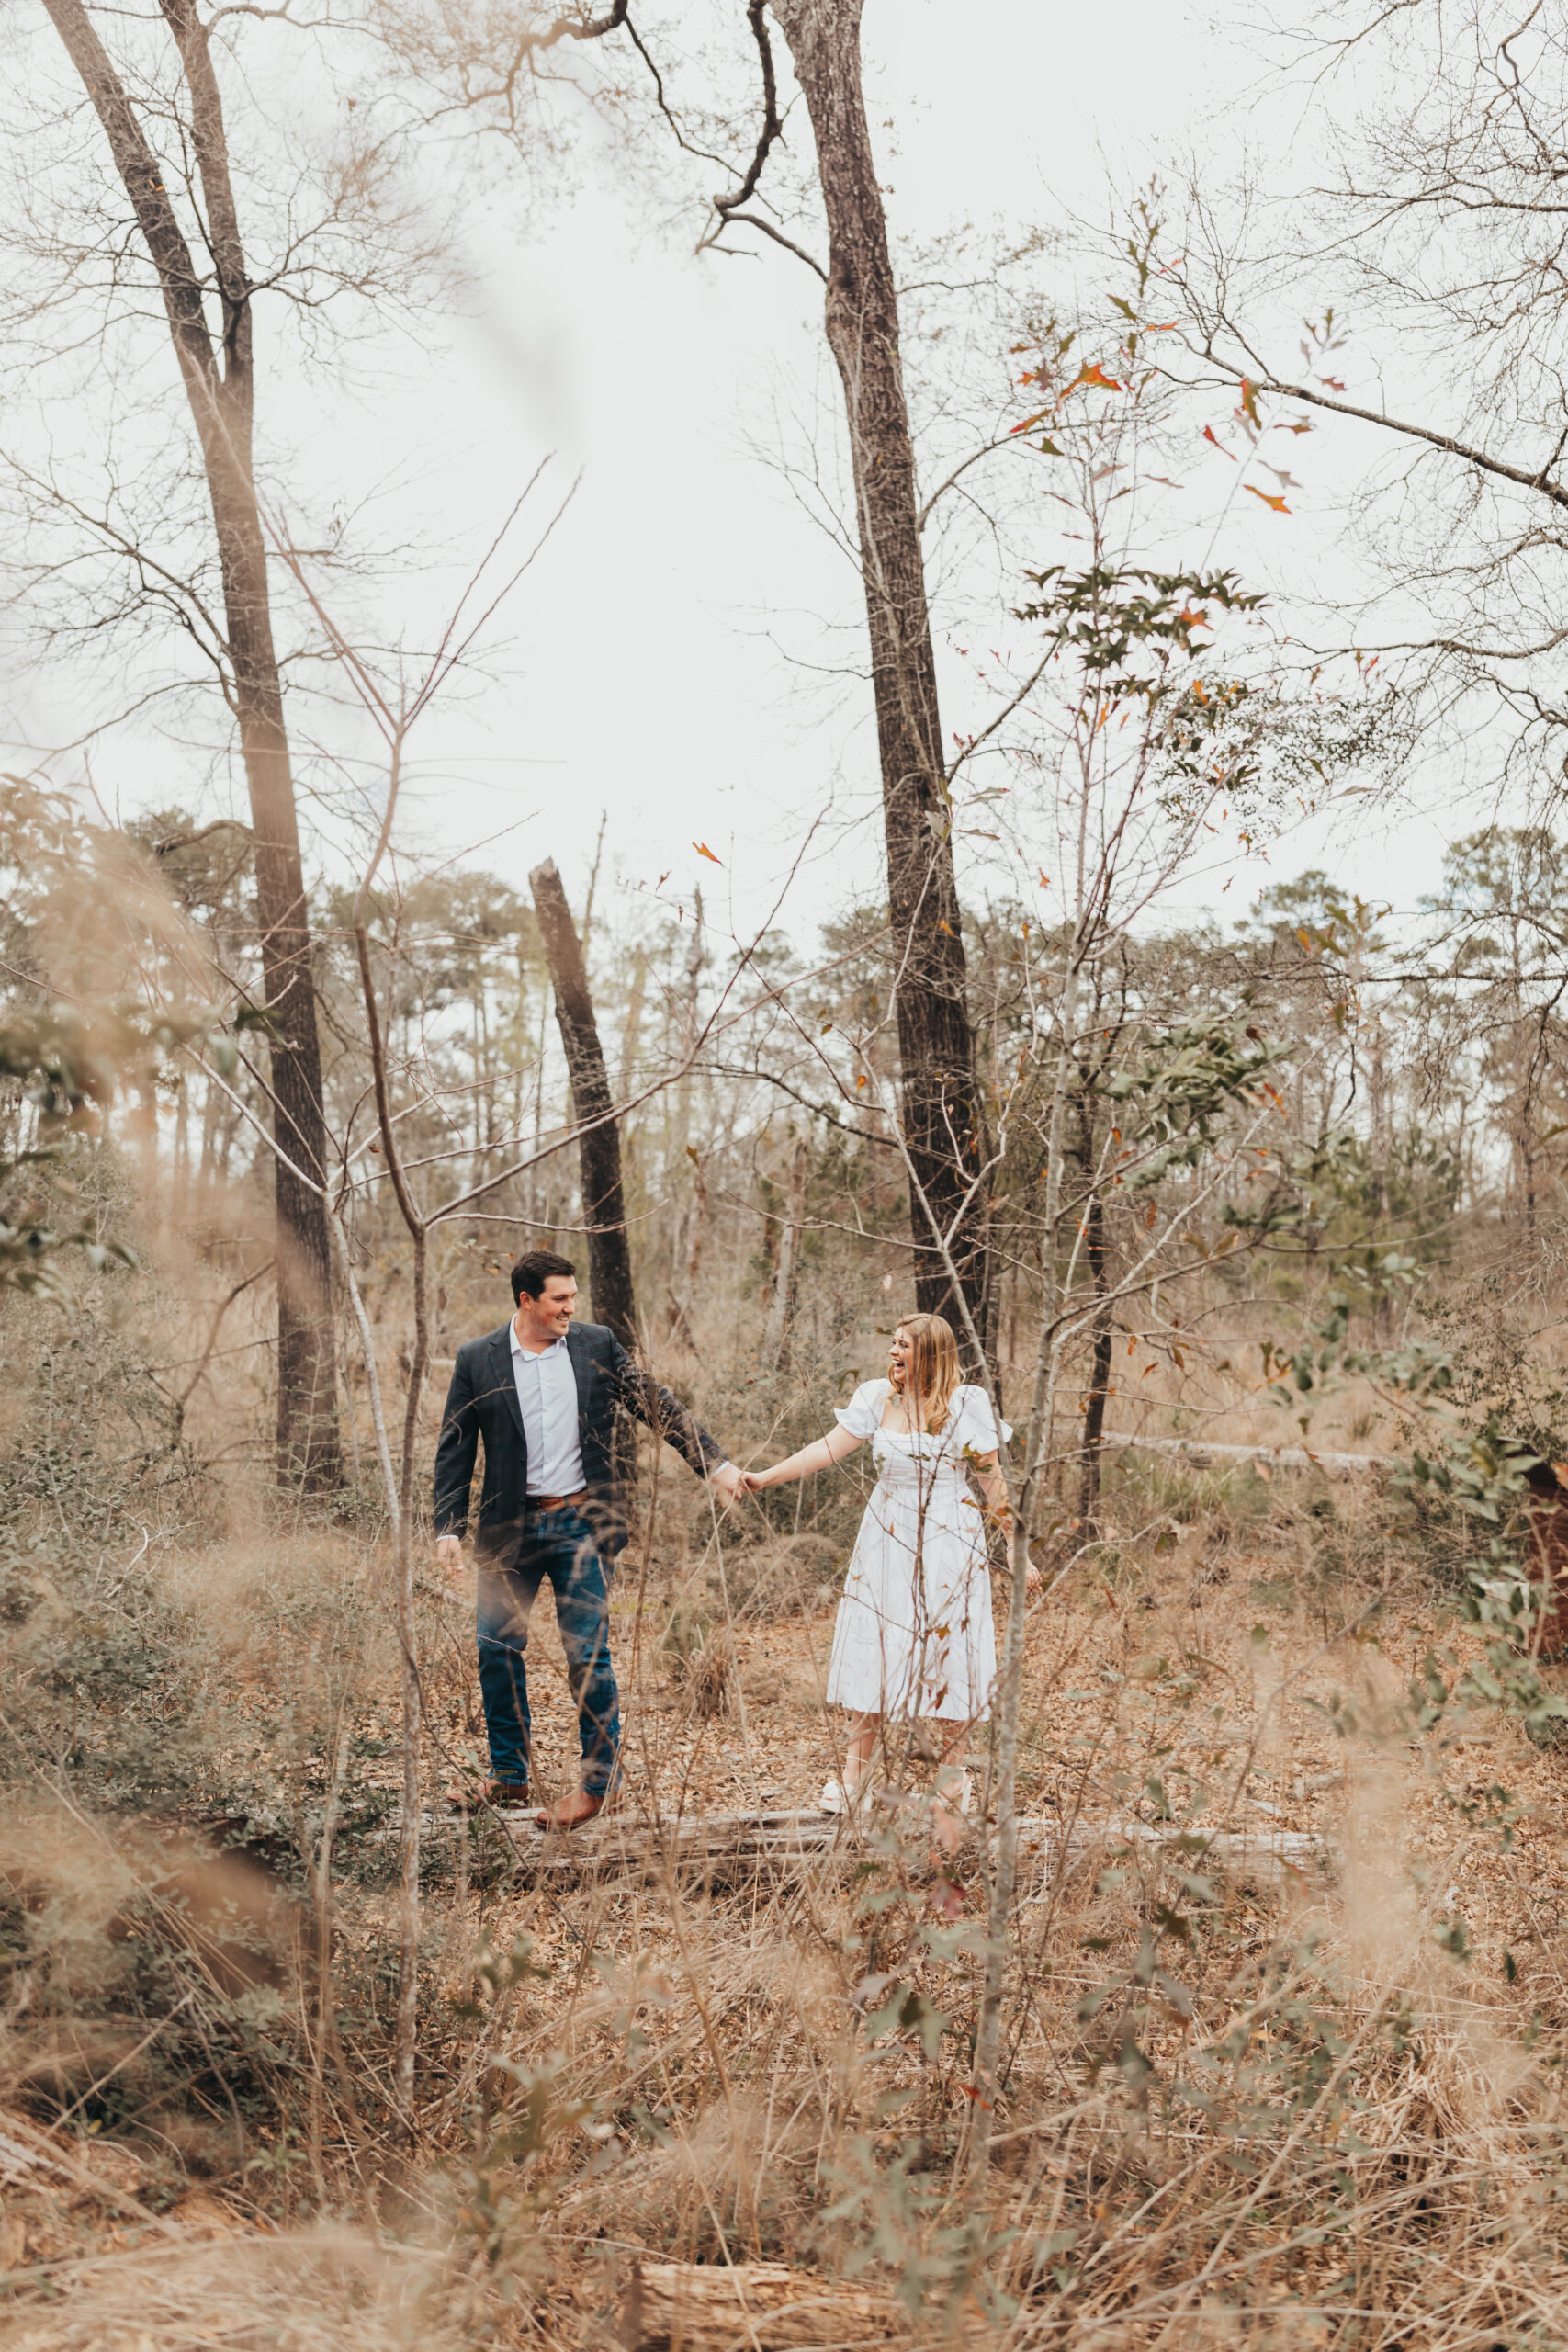 This couple holds hands while walking along a log for their engagement session at a Houston Garden Wedding Venue.